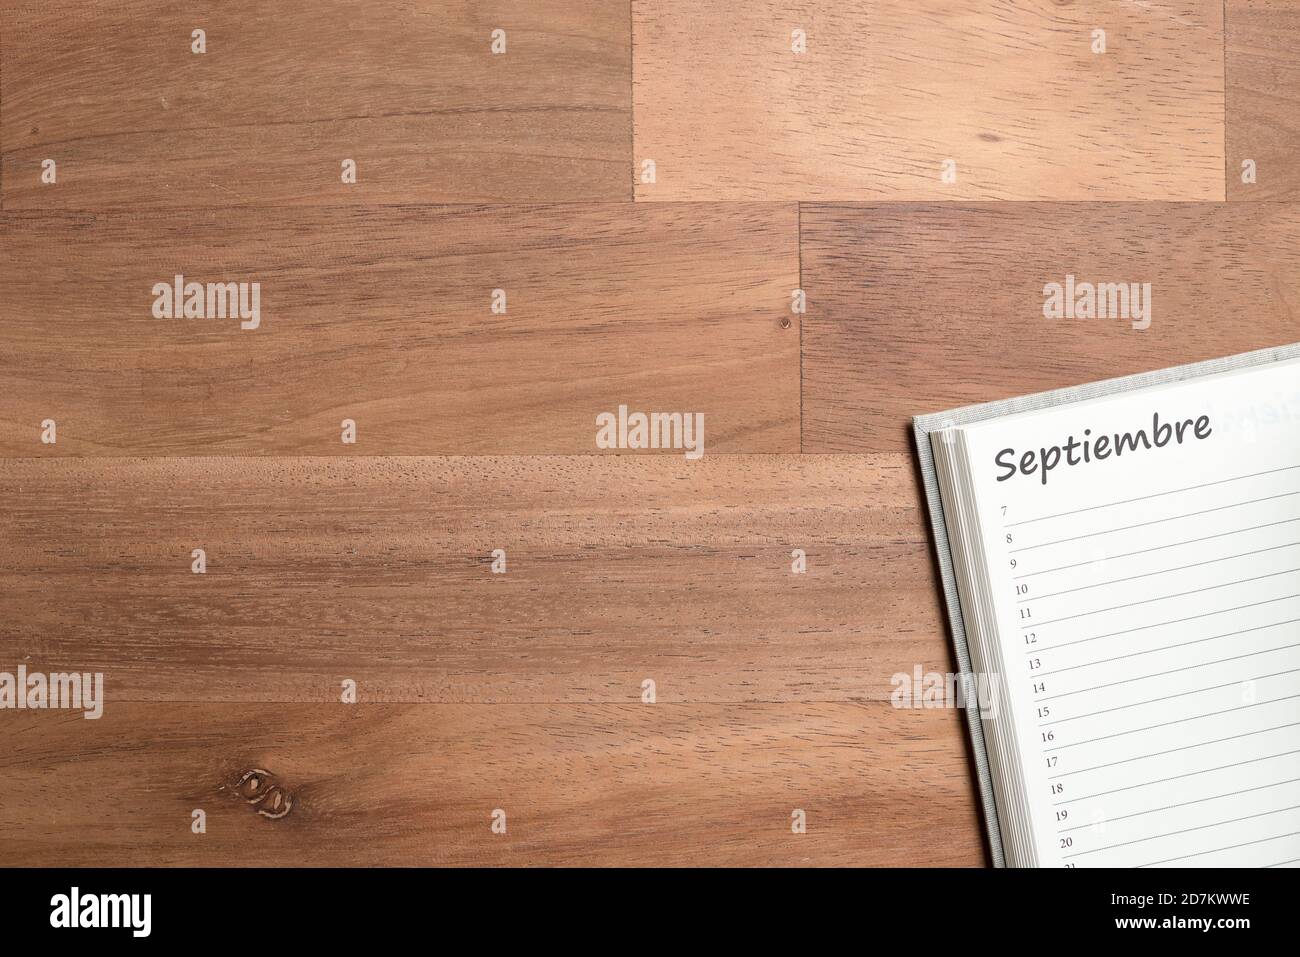 Blank page of a daily planner in Spanish for the month of September, on a wooden background. View from above with copy space Stock Photo